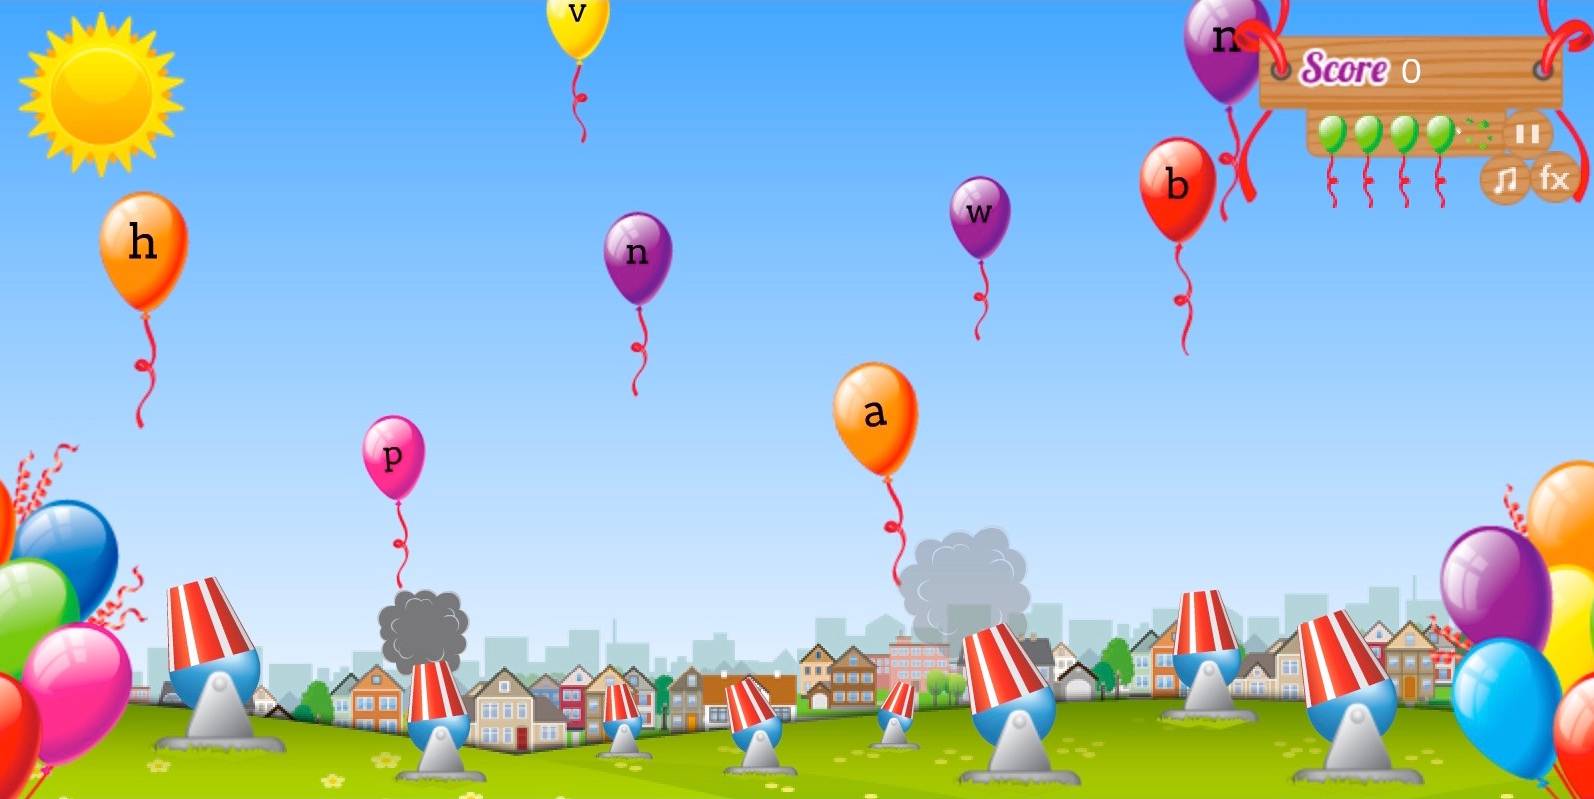 screenshot of a typing game where you shoot down balloons